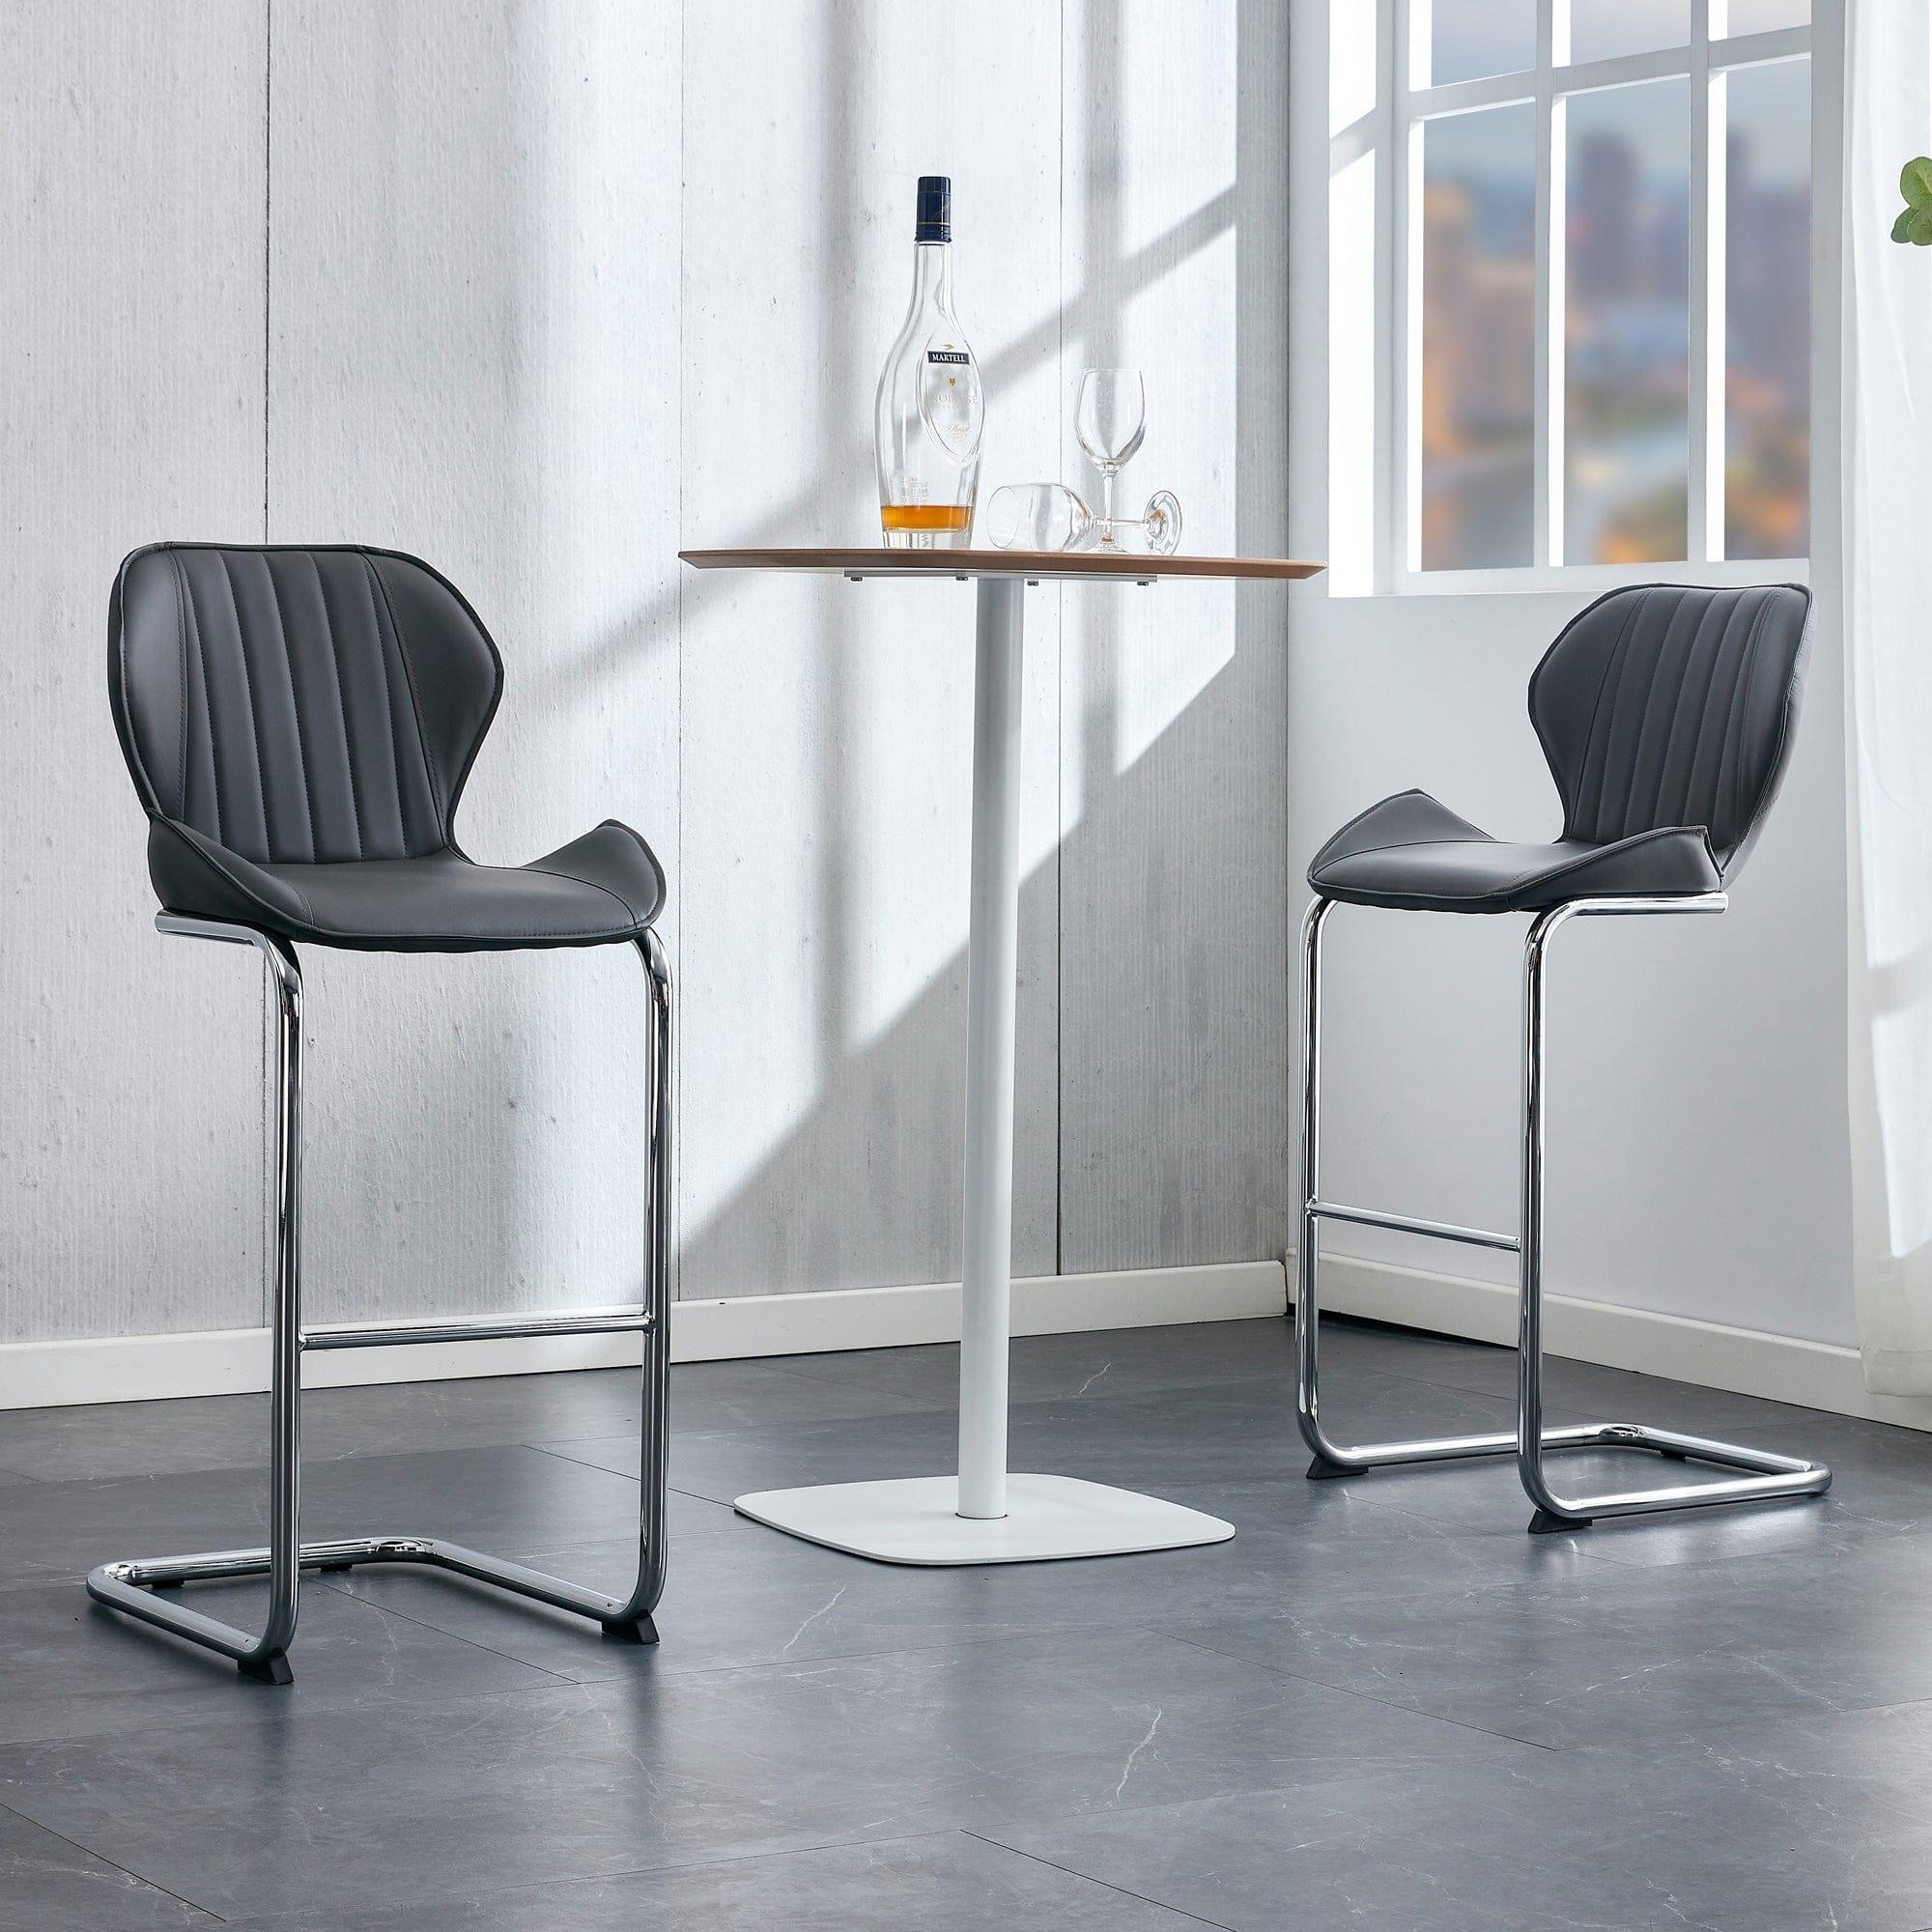 Shop Bar chair modern design for dining and kitchen barstool with metal legs set of 4 (Grey) Mademoiselle Home Decor